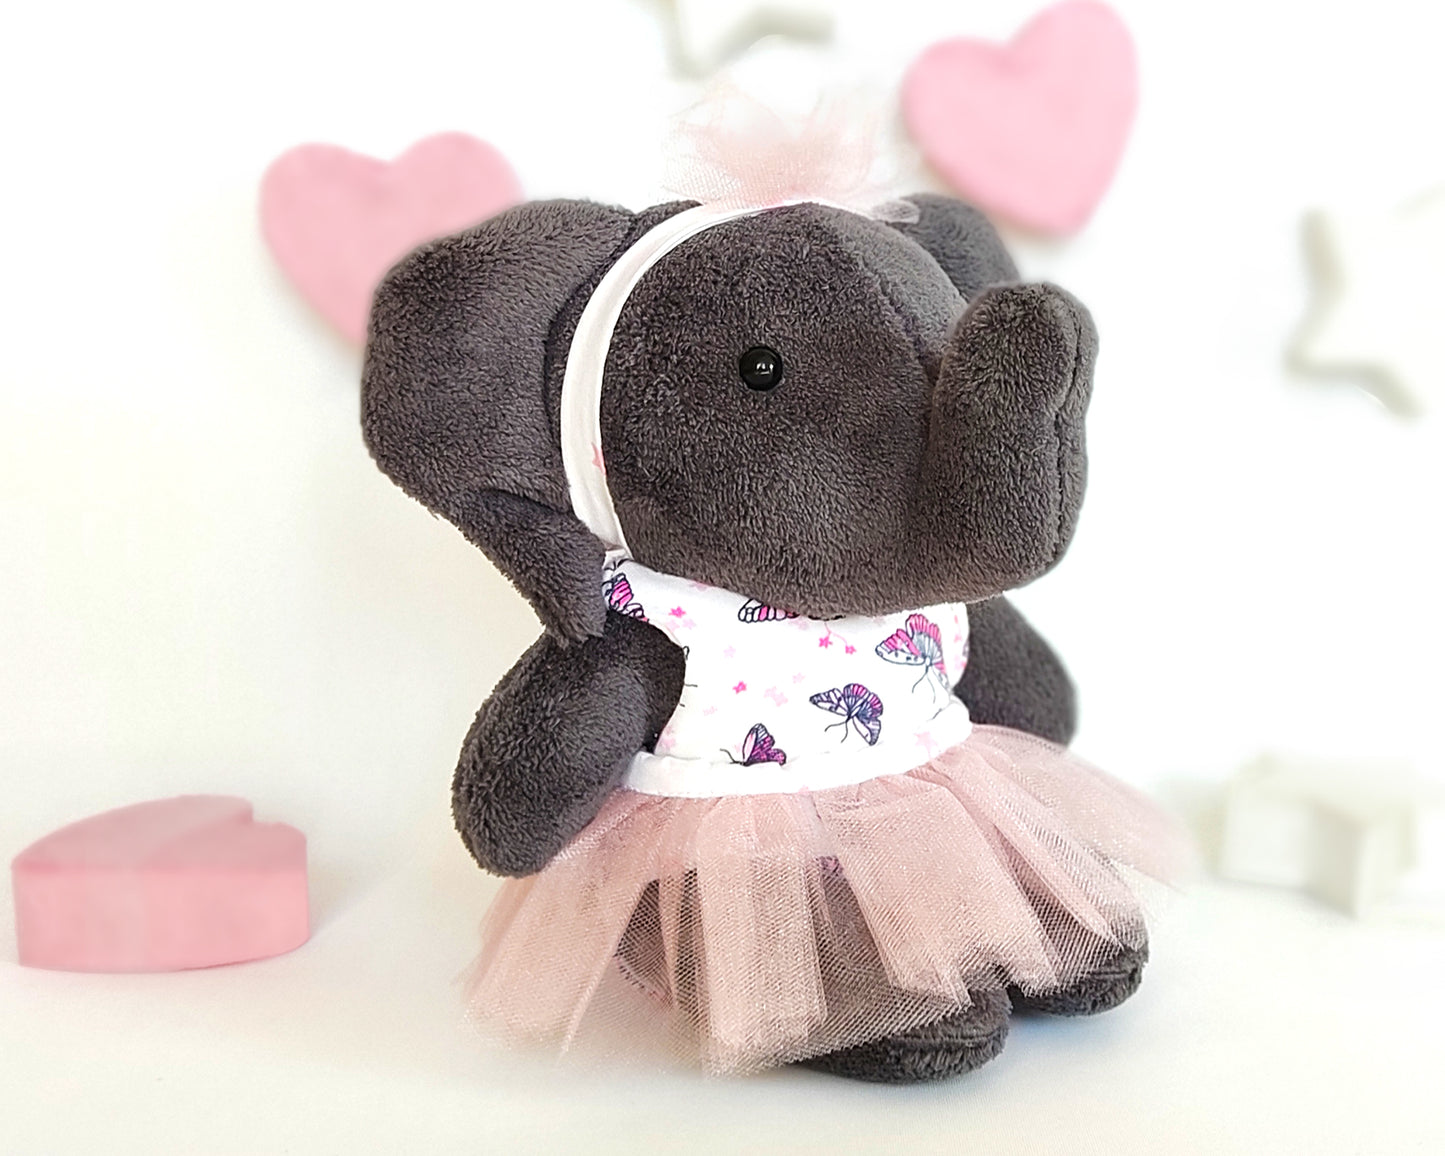 Baby Animal Elephant - PDF sewing pattern and tutorial